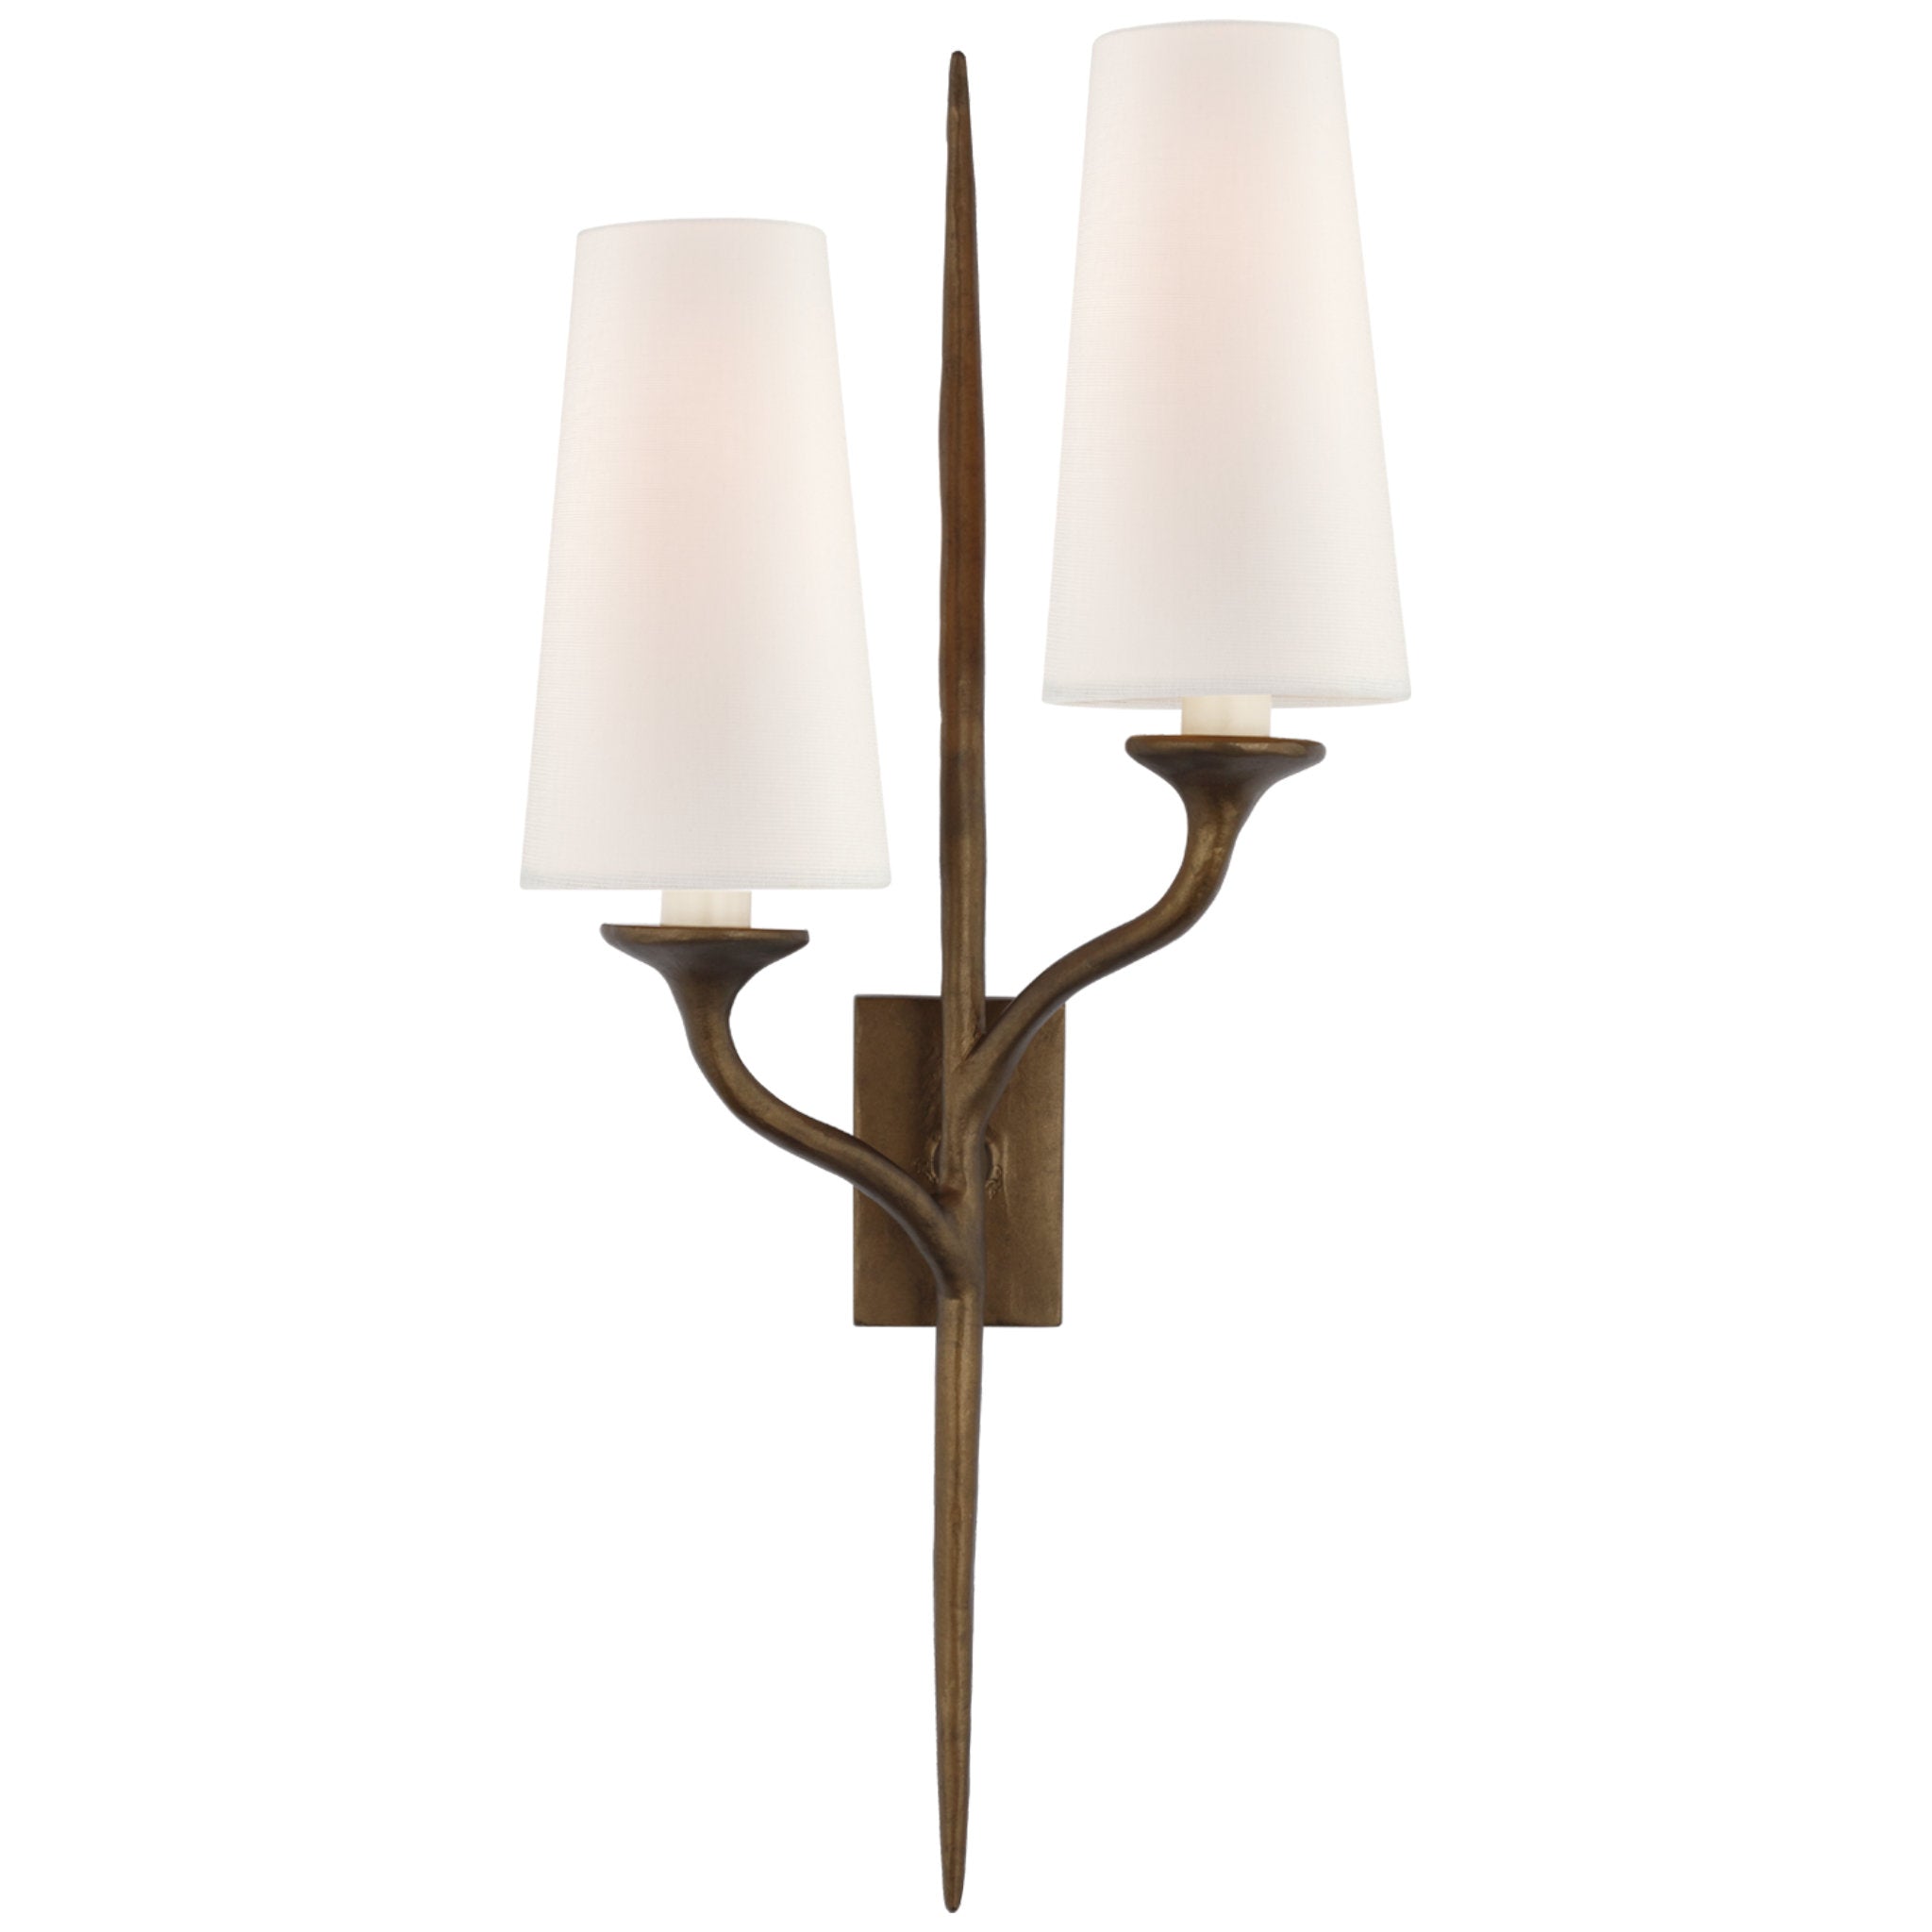 Julie Neill Iberia Double Right Sconce in Antique Bronze Leaf with Linen Shades